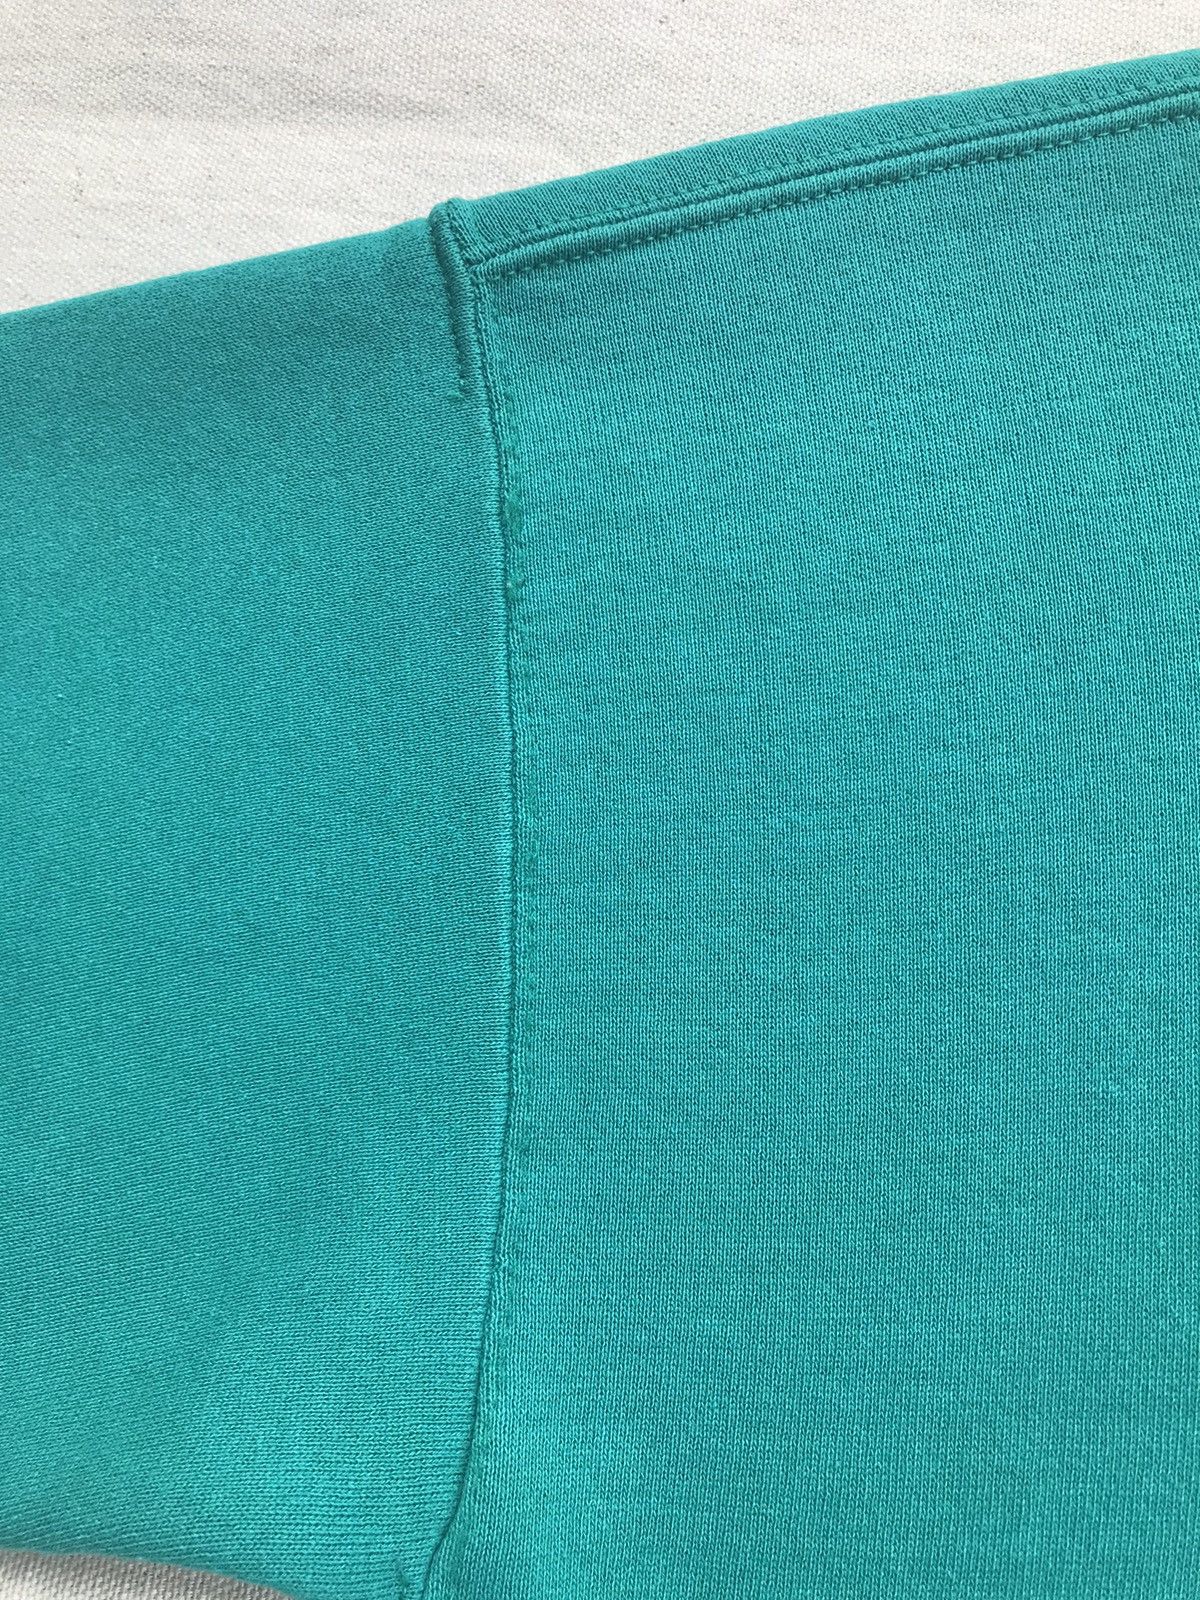 Lee VTG 90s Lee Heavyweight Turquoise Blank Sweatshirt Small Size US S / EU 44-46 / 1 - 8 Preview